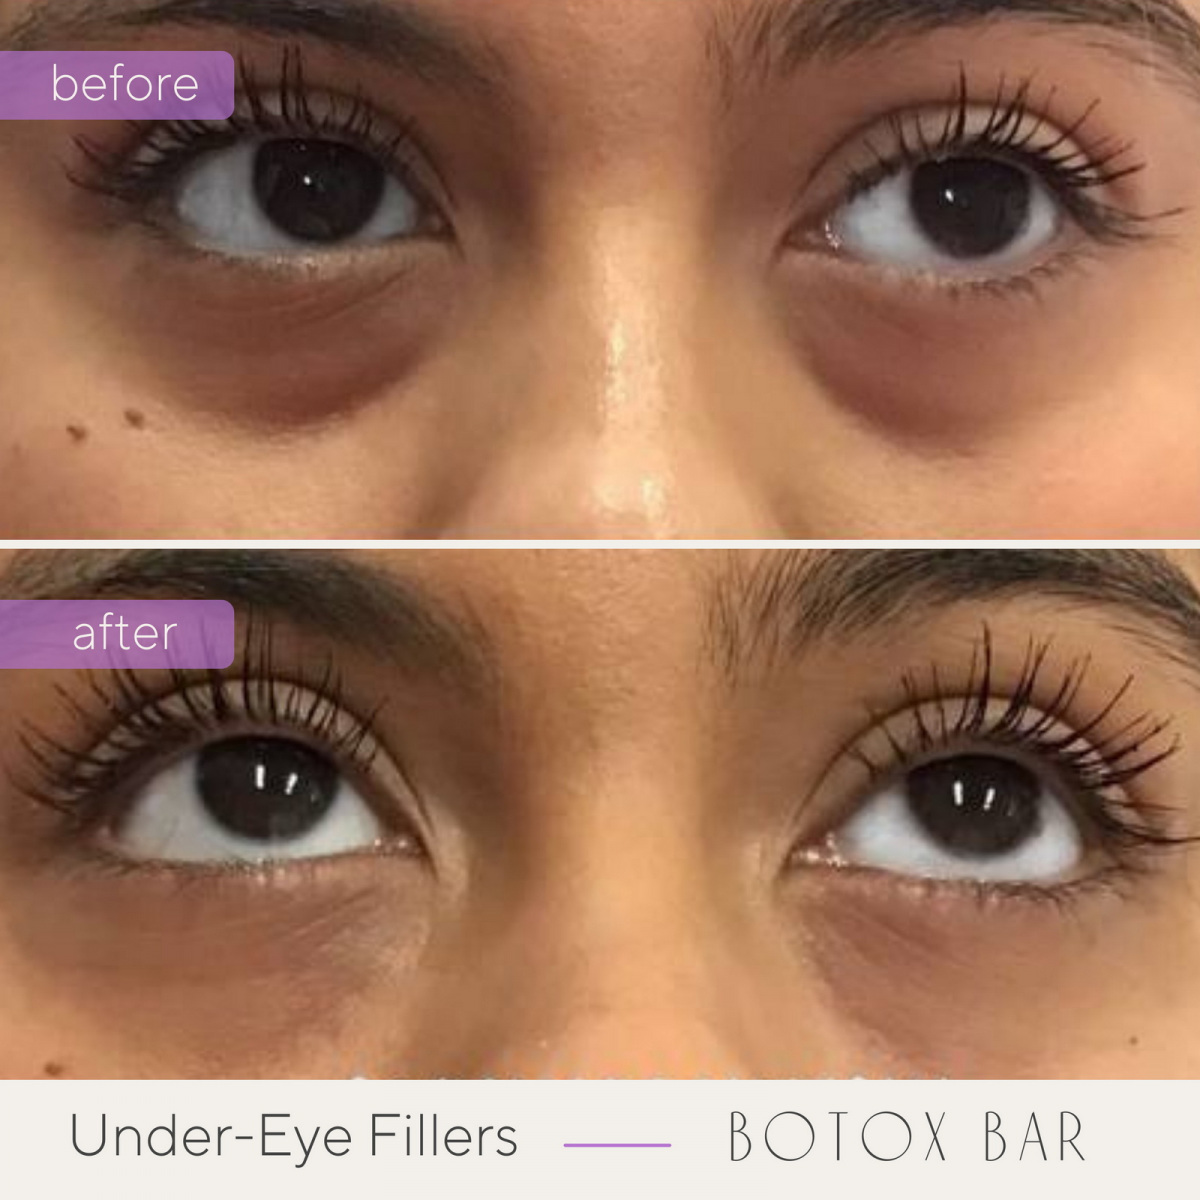 Before and After Under Eye Fillers in The Botox Bar and Aesthetics at Dallas & Sherman, TX